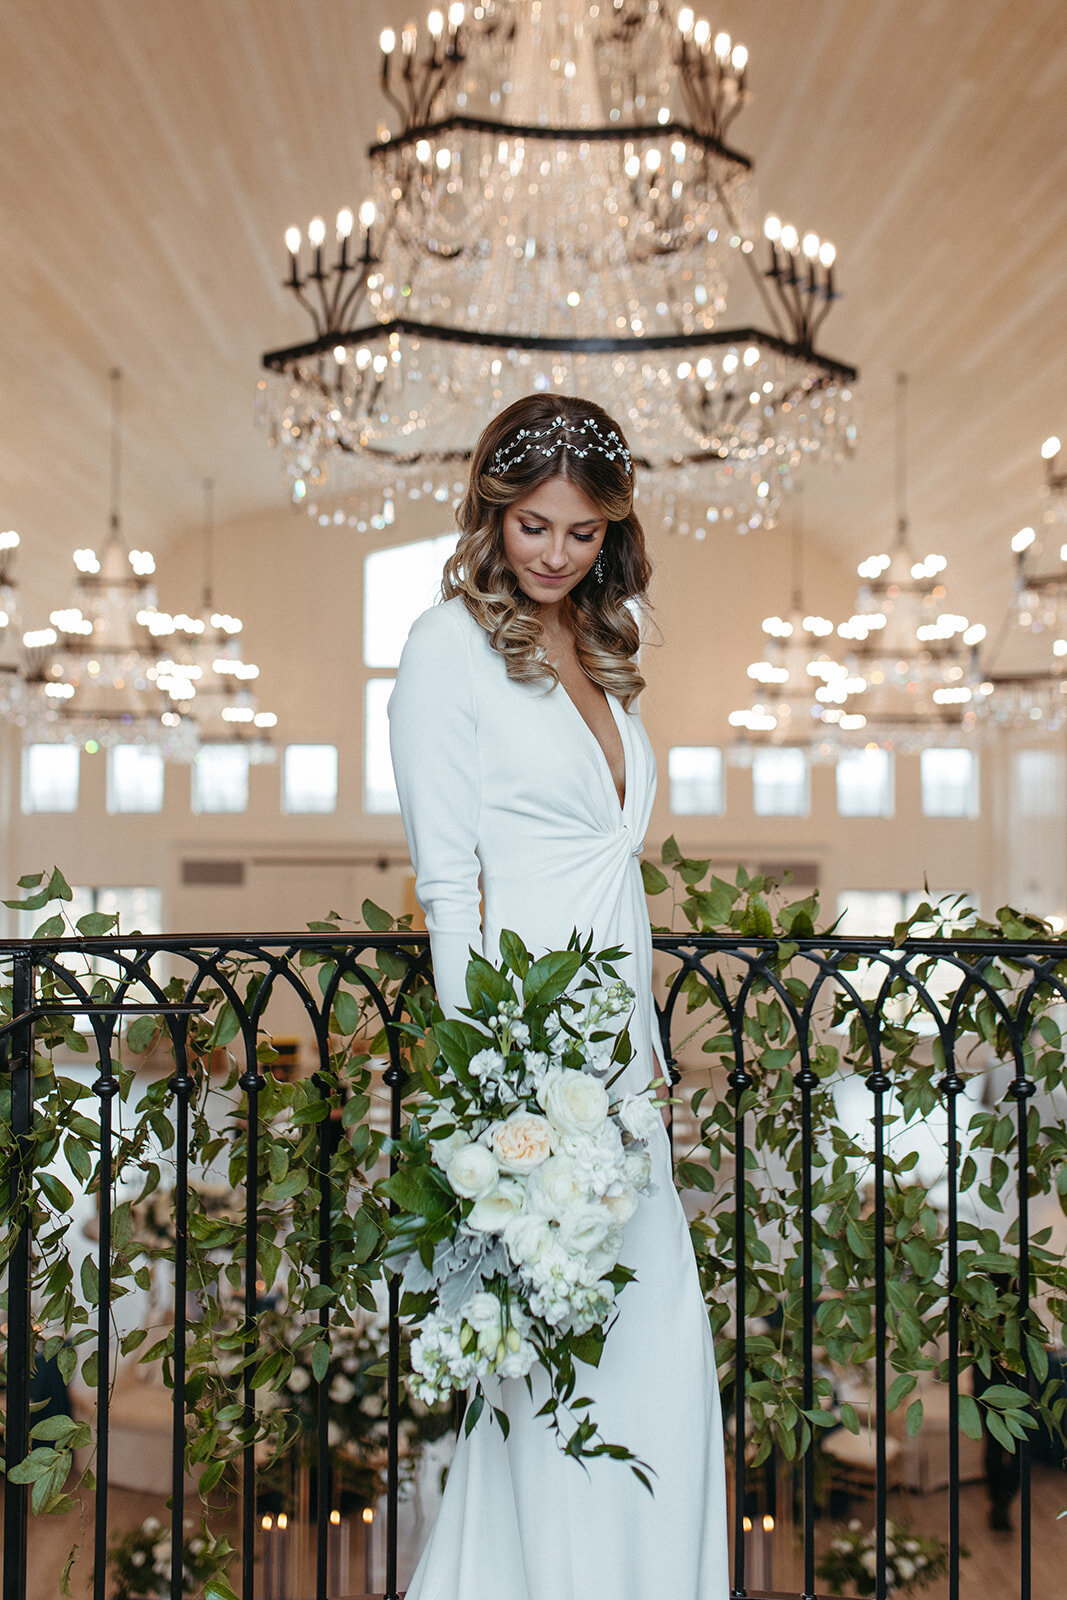 Bride in a white wedding gown stands in front of rail wrapped in garland holding a white bouquet with a chandelier above.